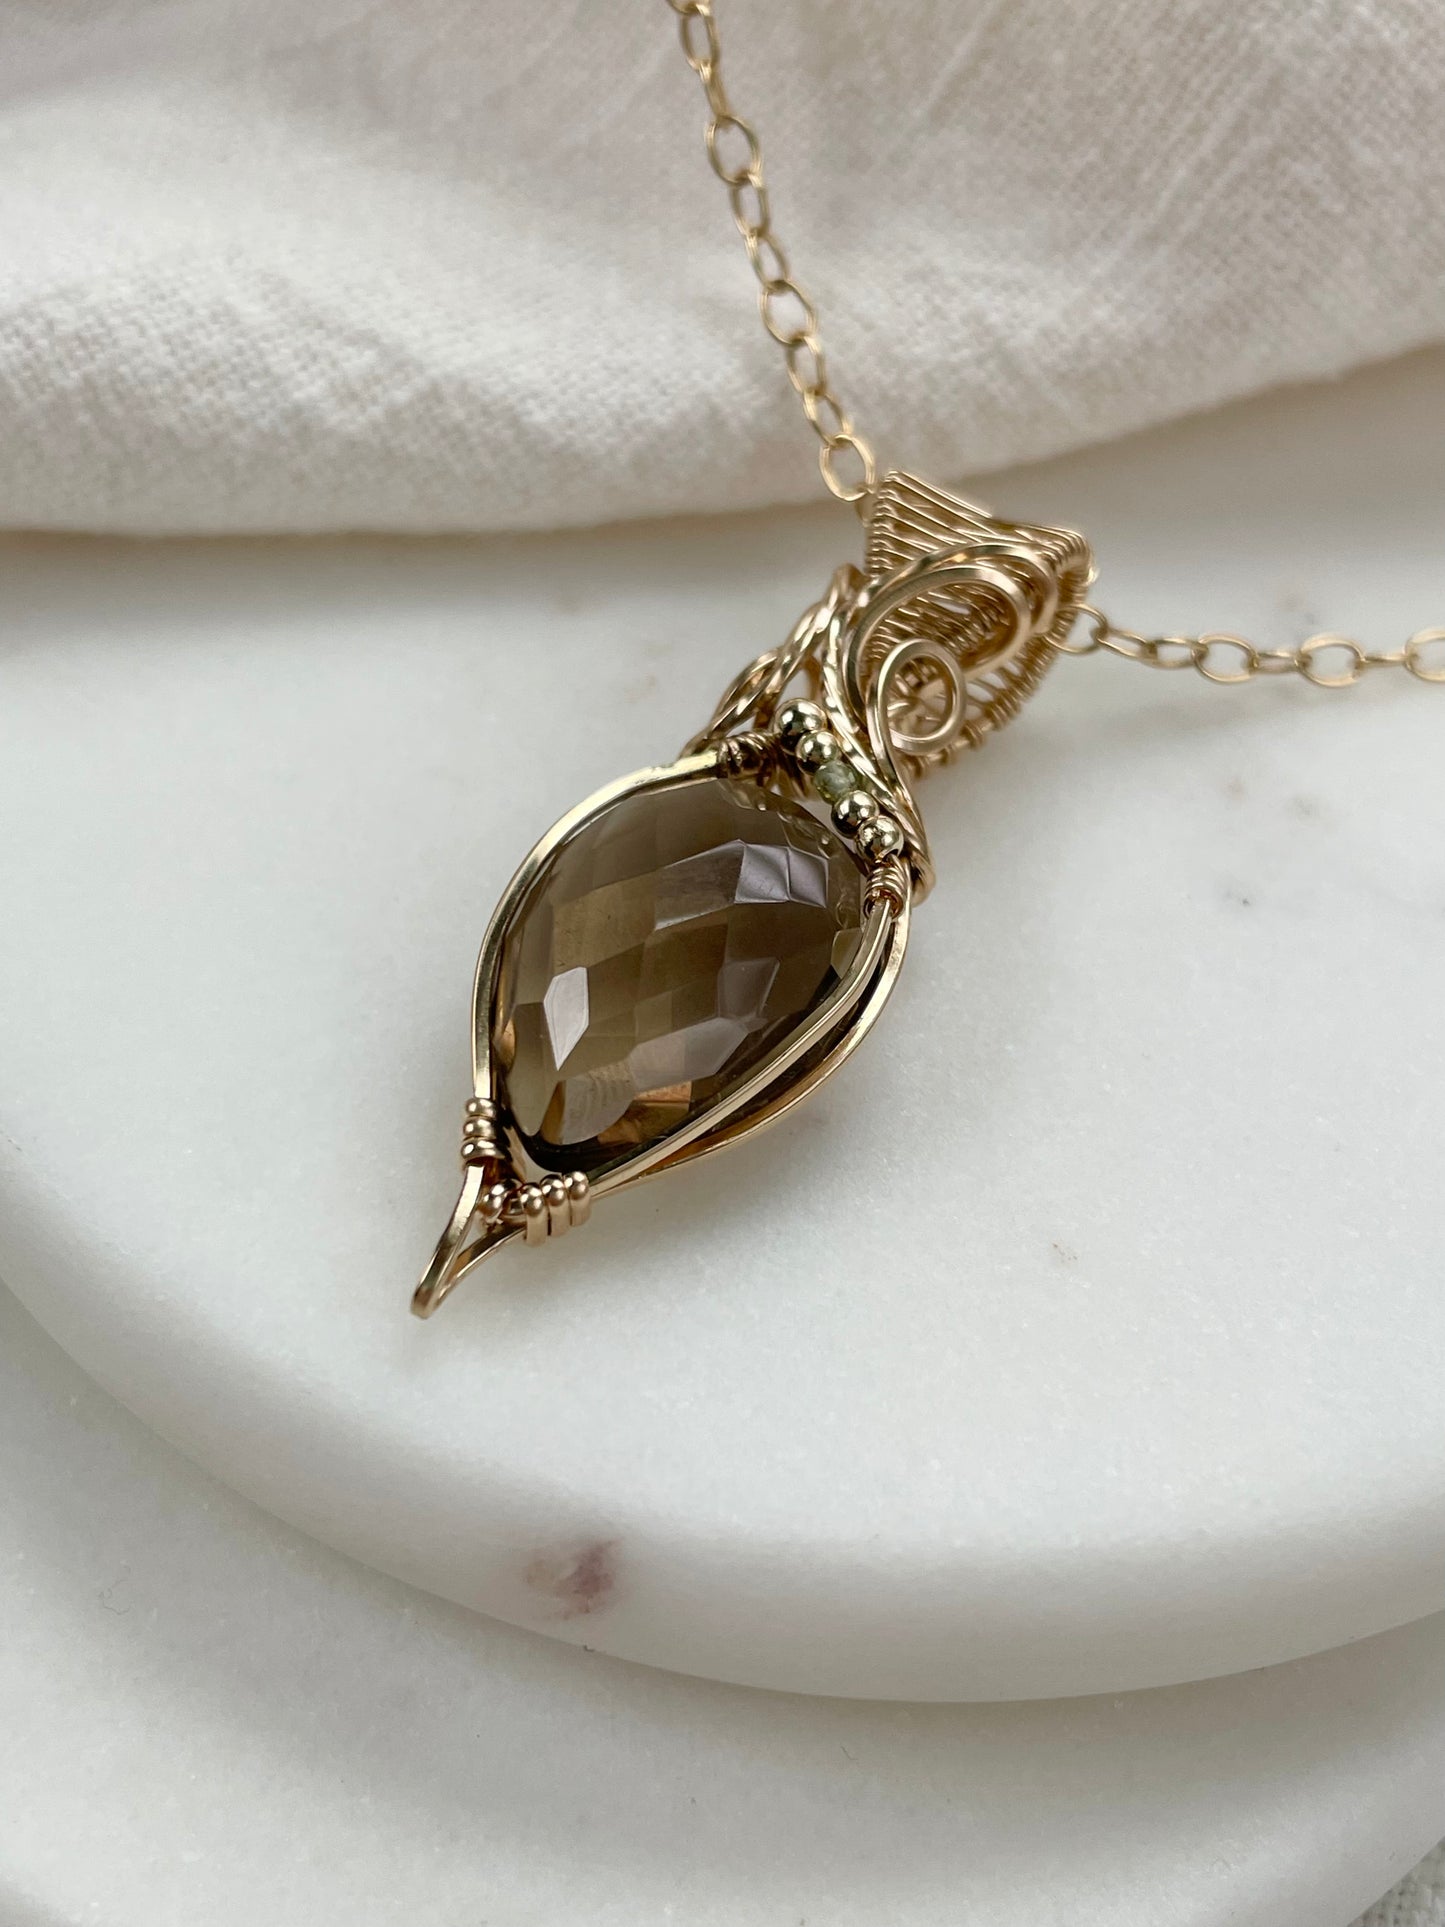 Faceted Smoky Quartz, Peridot Necklace in 14k Gold Filled